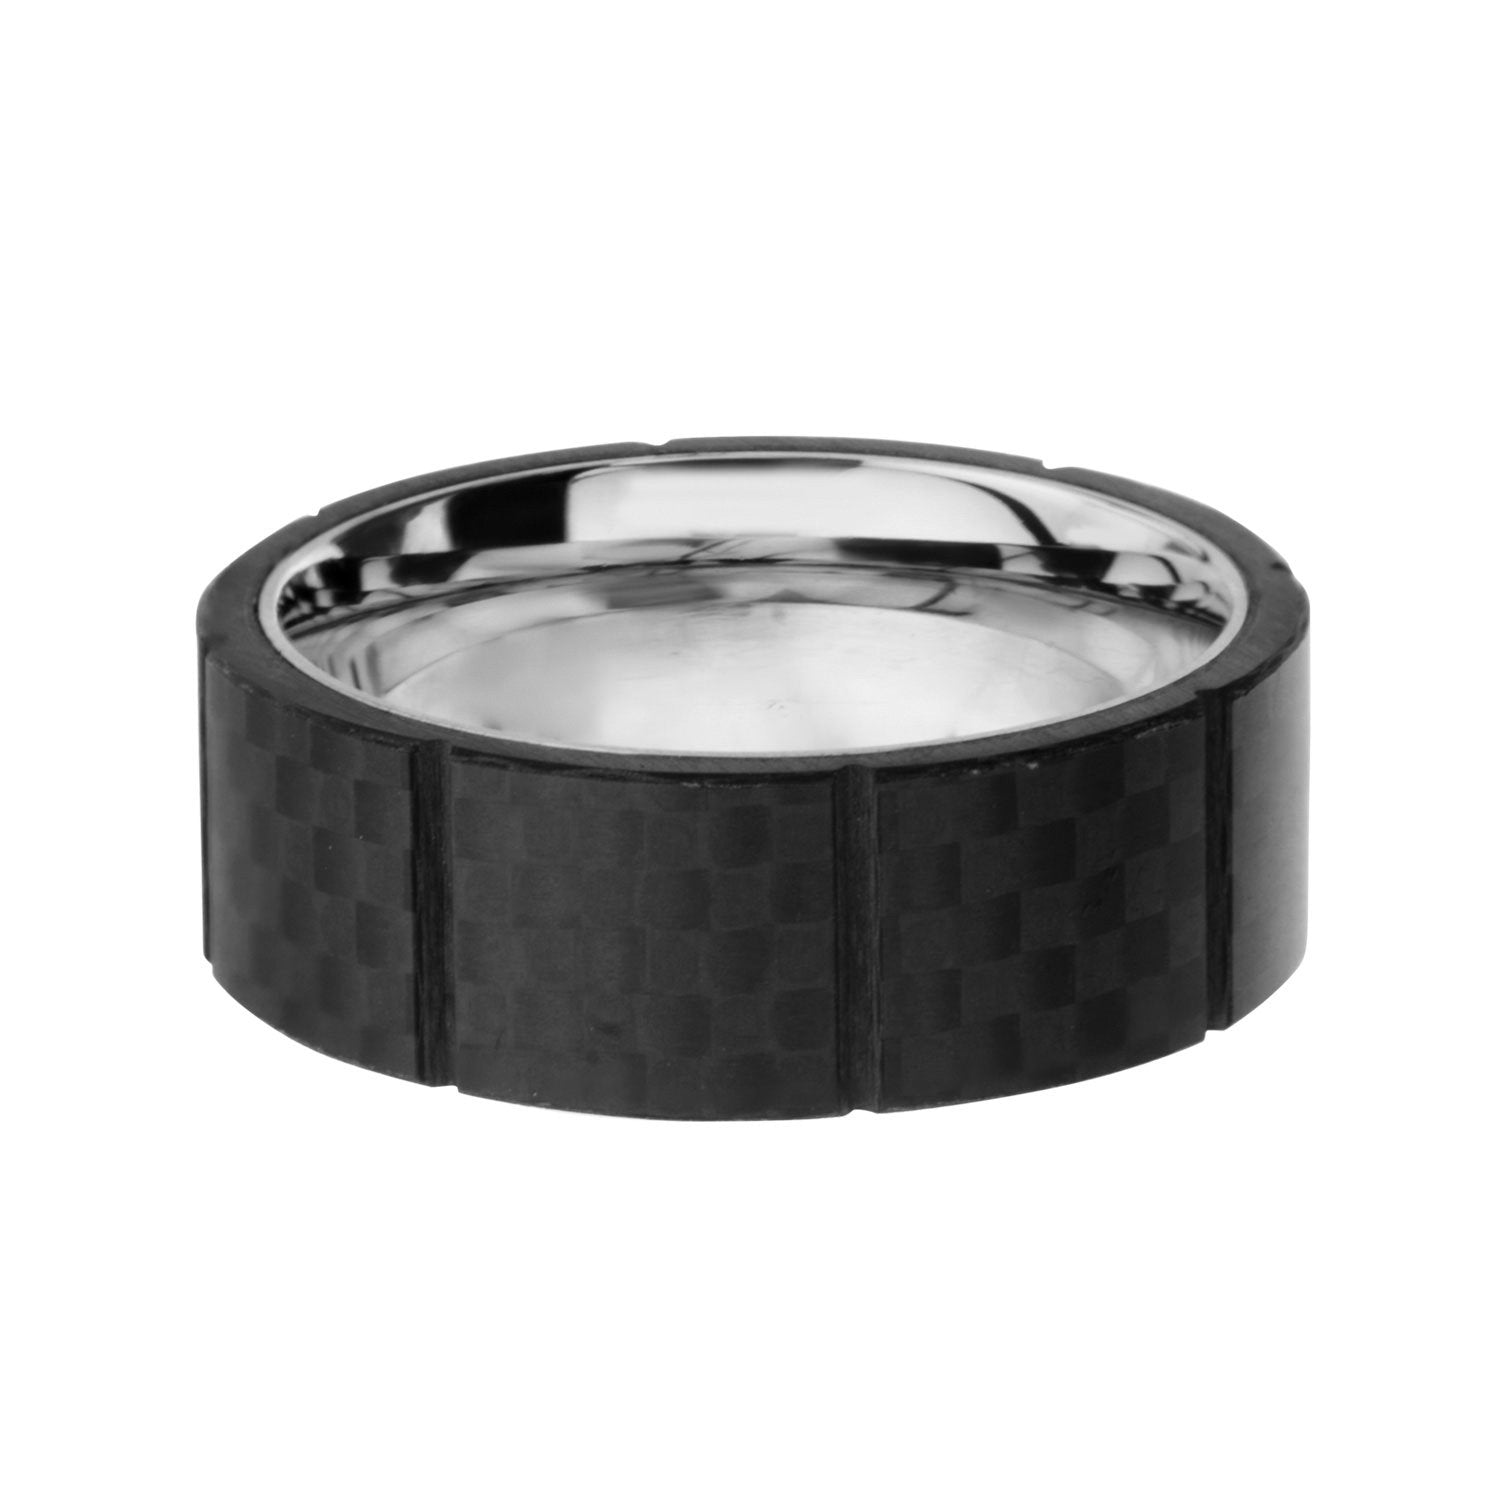 Mens Solid Carbon Fiber Ridged Stainless Steel Ring